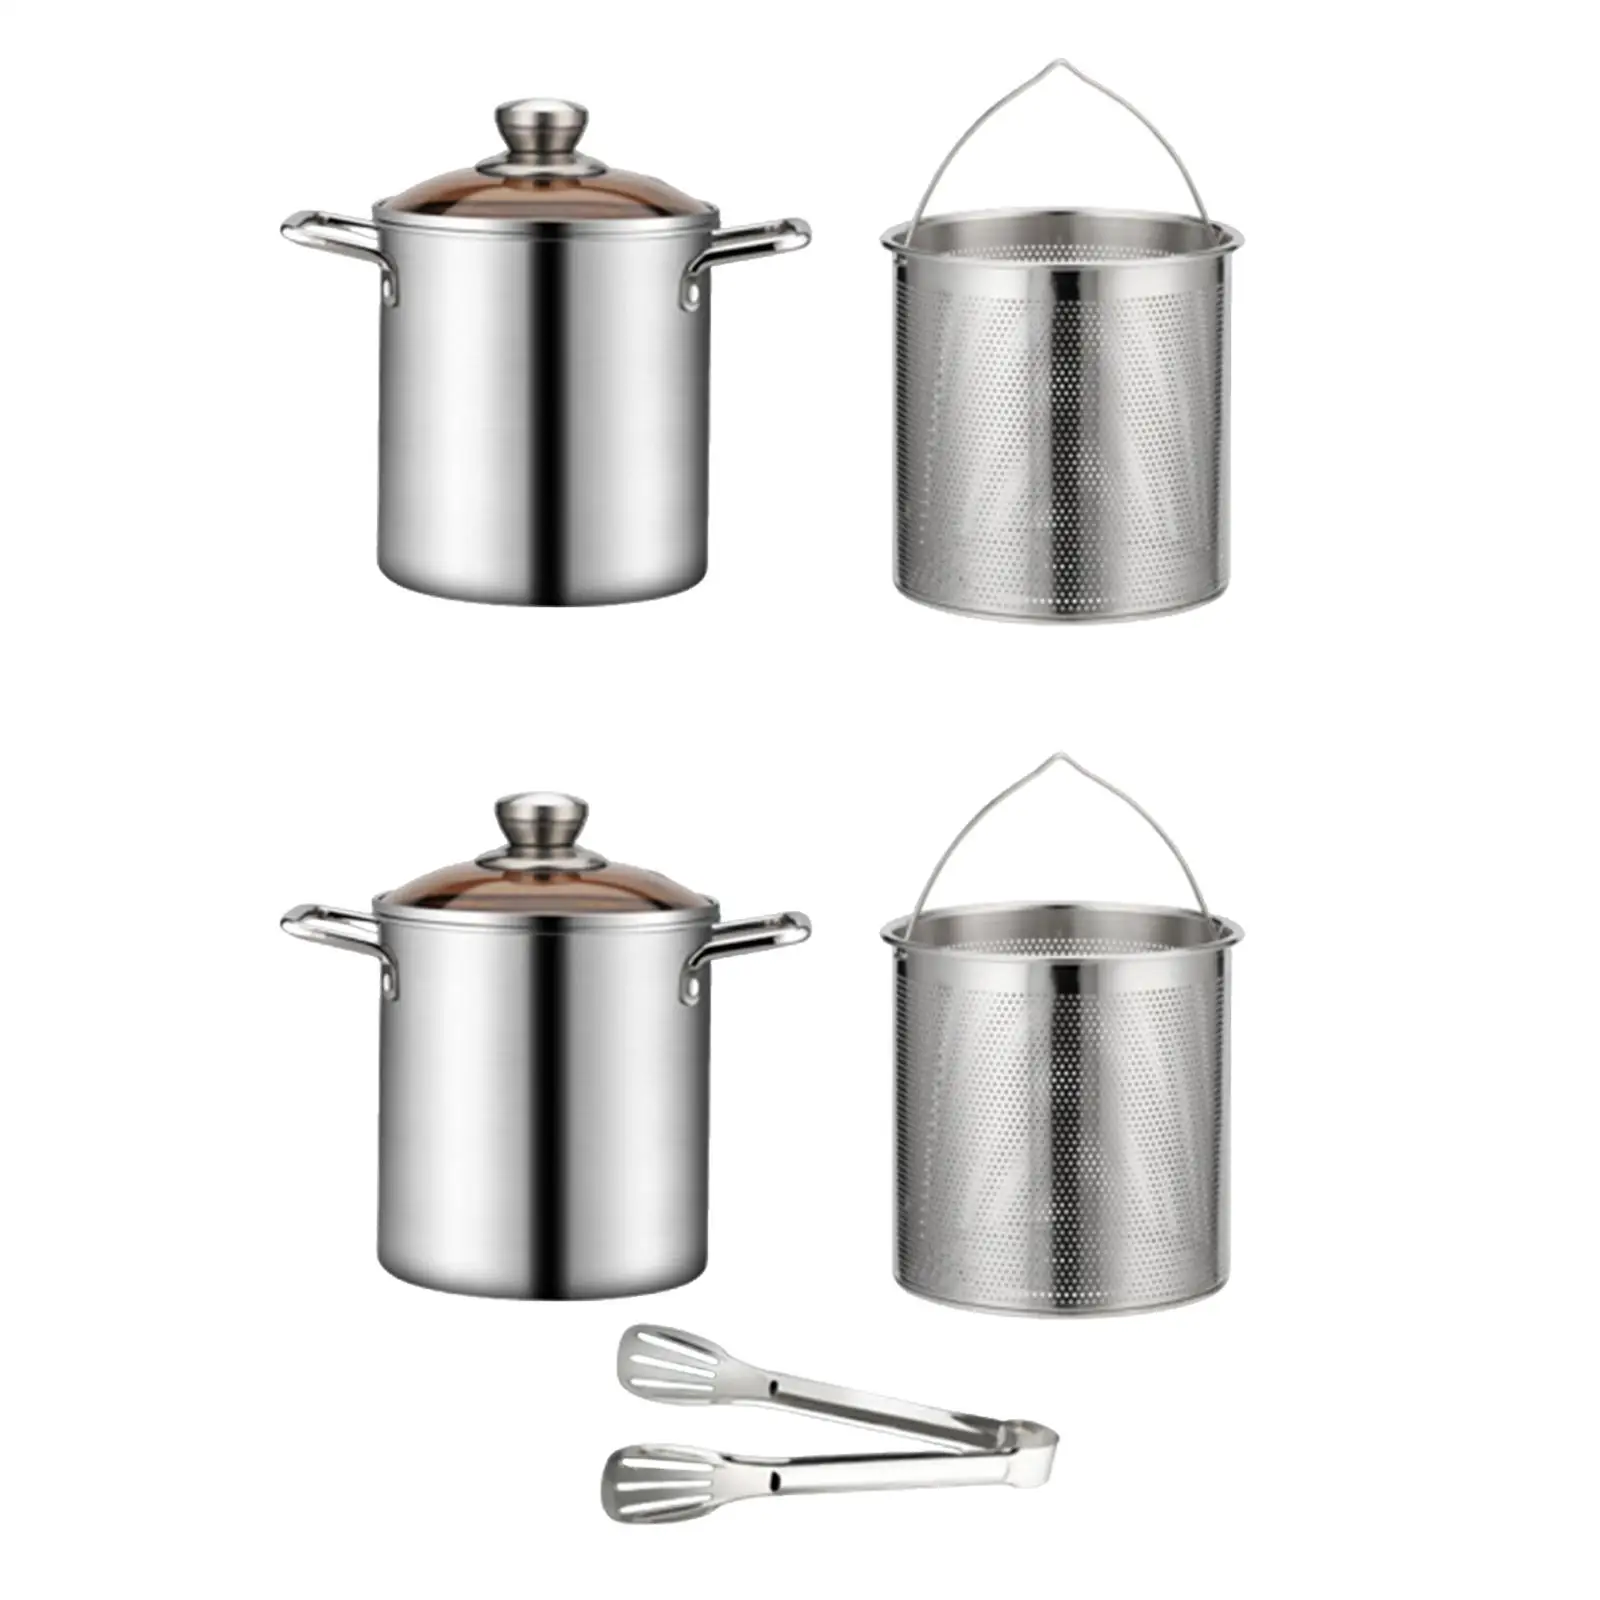 Stainless Steel Stockpot with Basket Nonstick Double Handle Reinforced Bottom Cookware Turkey Fryer Pot Heavy Duty Cooking Pot